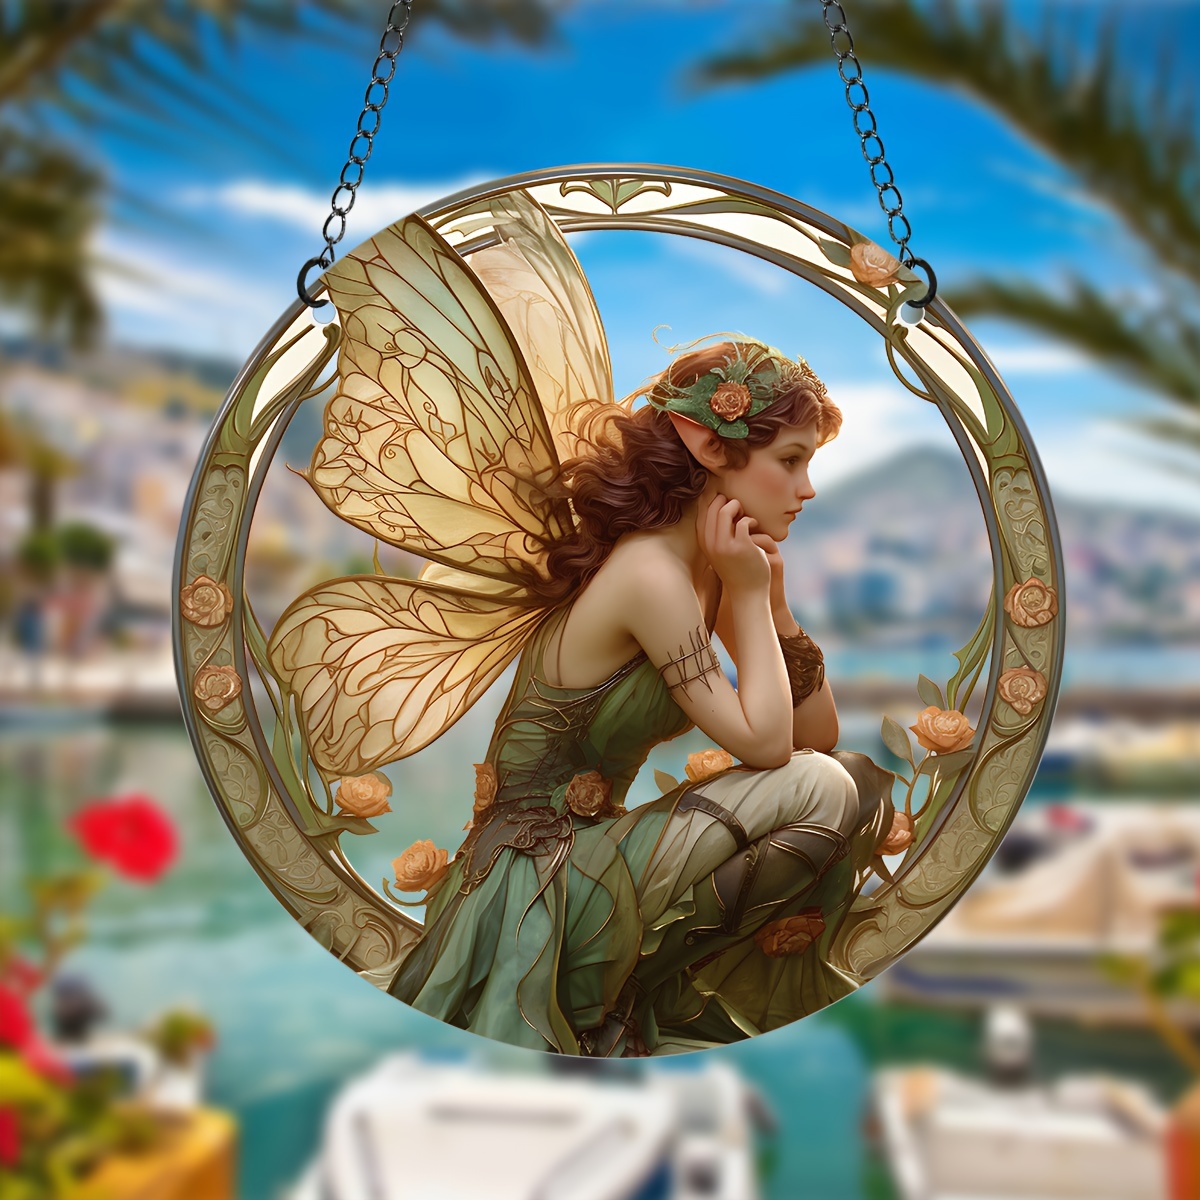 

Acrylic Flower Fairy Hanging Decoration - Transparent Round Ornamental Tag With Fairy And Floral Design - Ideal For Home, Bedroom, Living Room, Garden Art Gift - 5.9" Diameter(1pc)